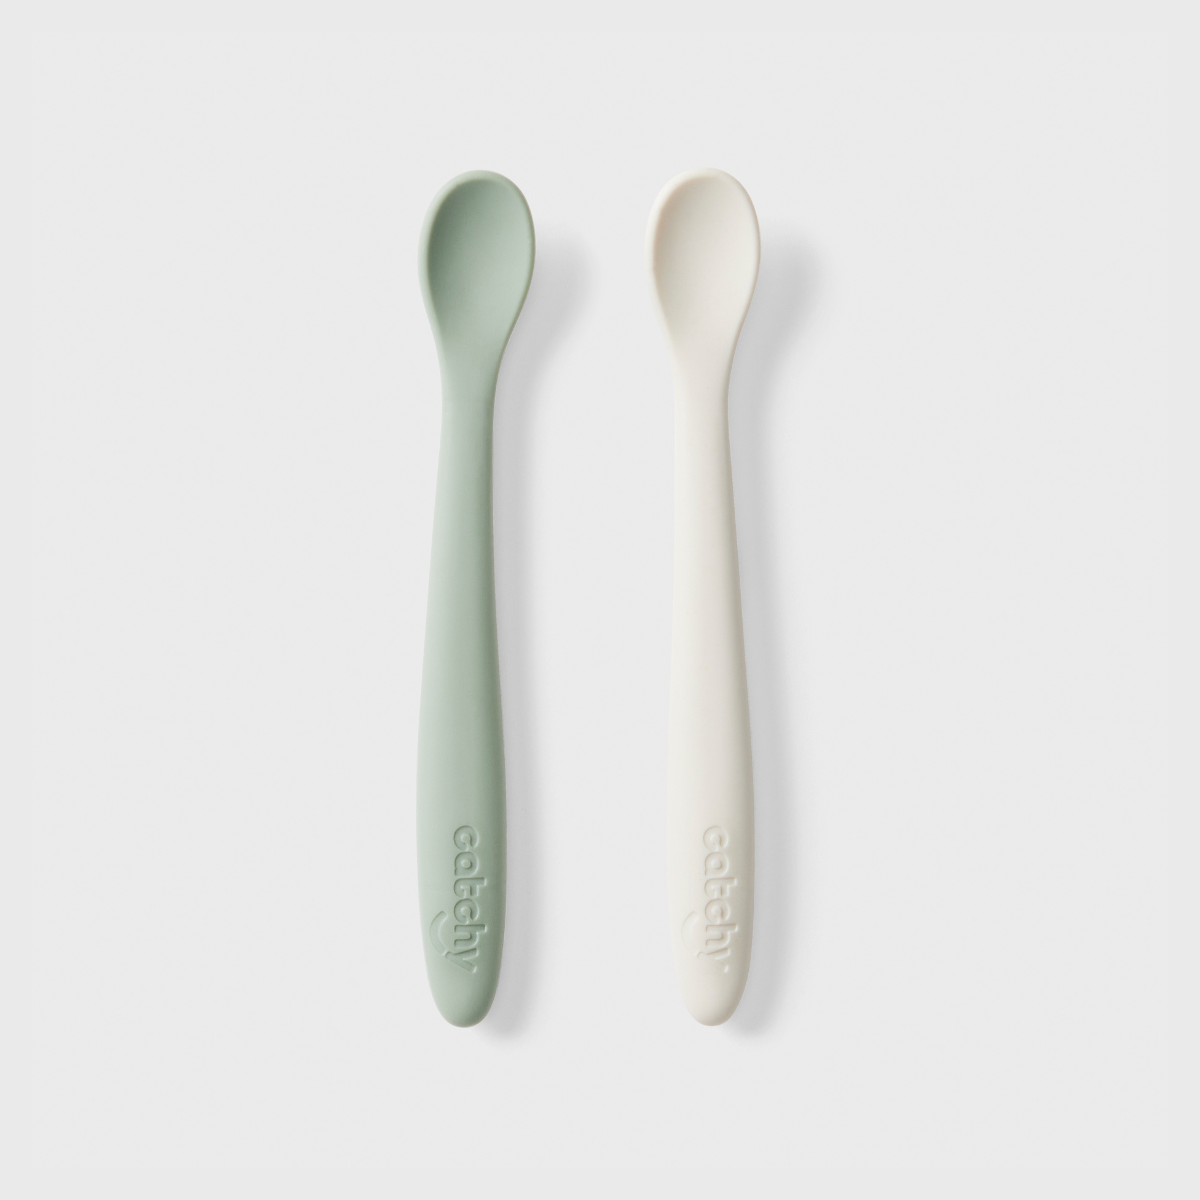 Long Feeding Spoons - 2 Pack - Catchy